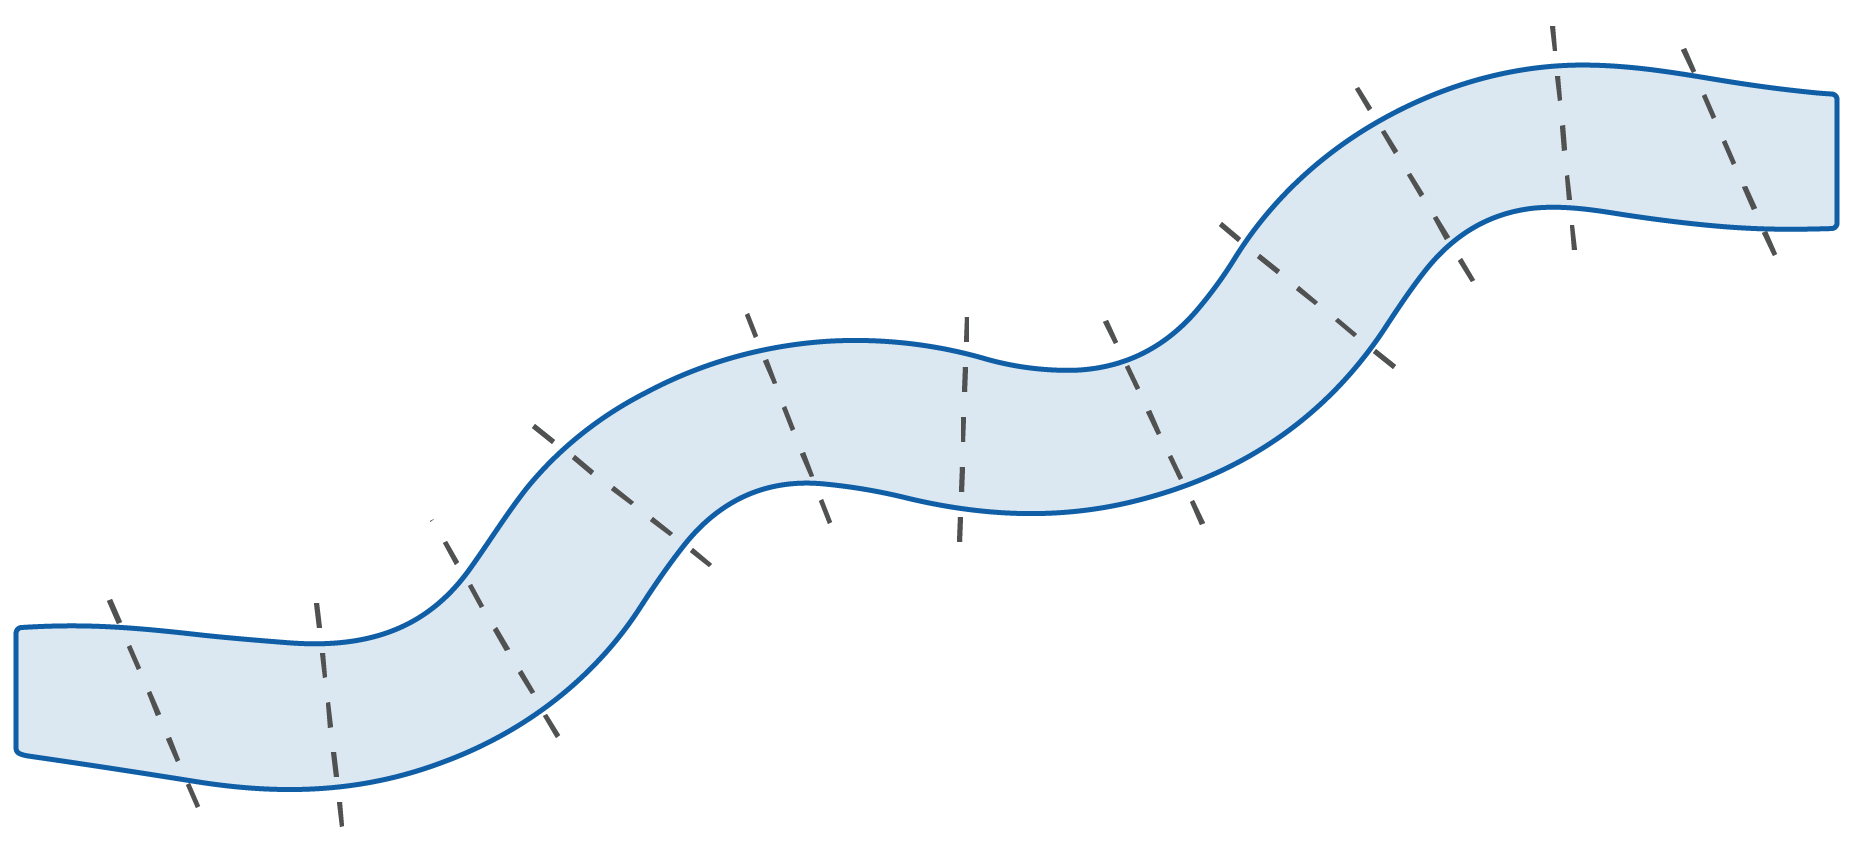 Schematic of stream segment showing 11 evenly spaced transects.